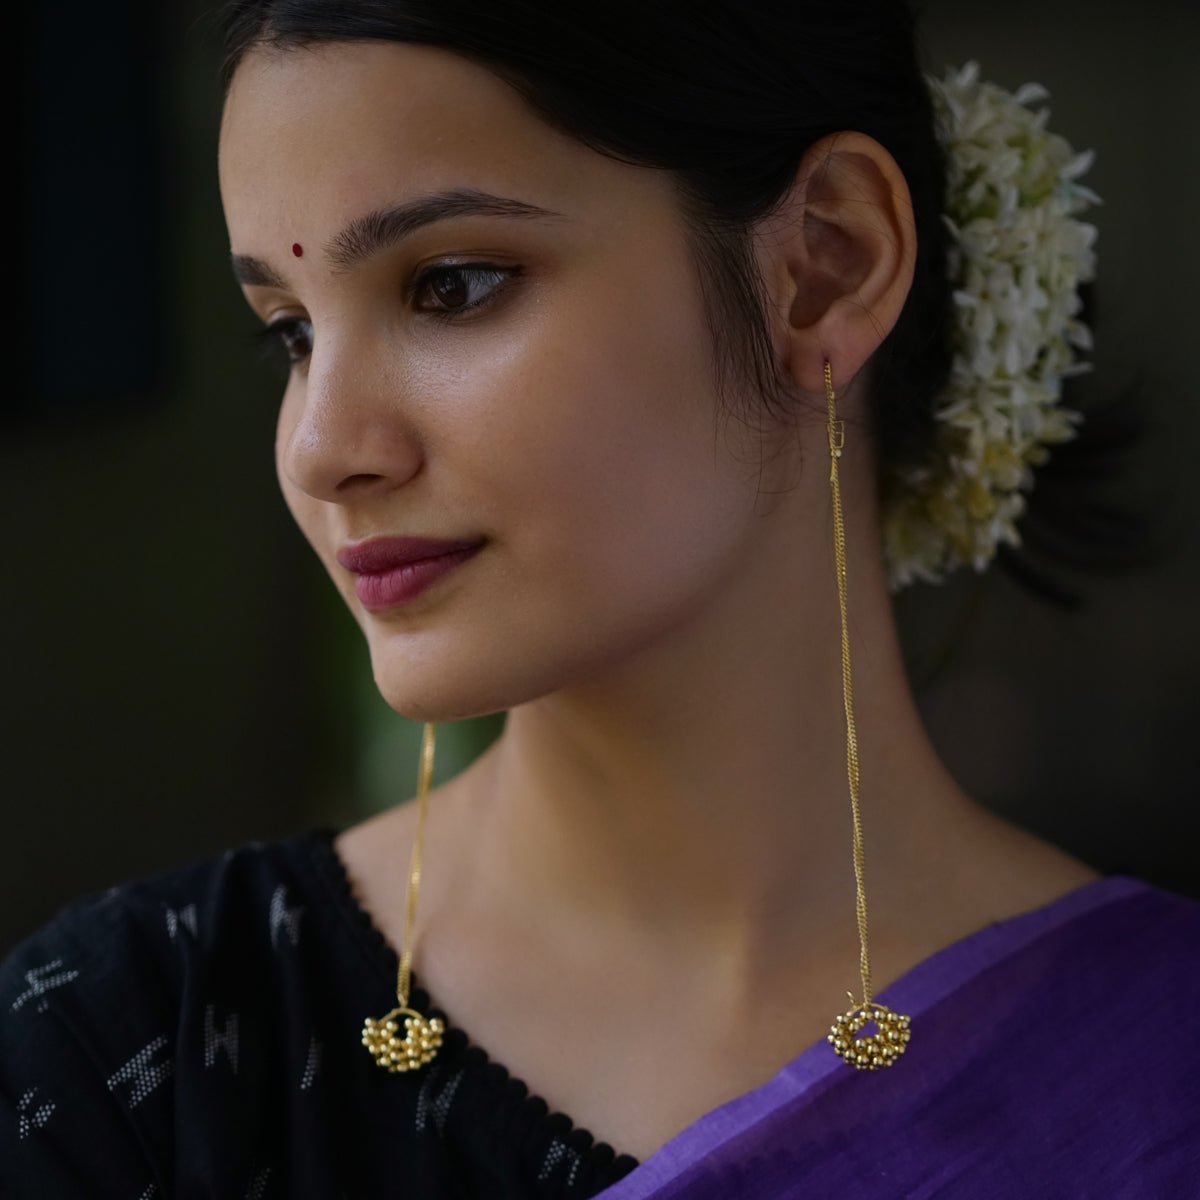 a woman wearing a purple saree and gold earrings